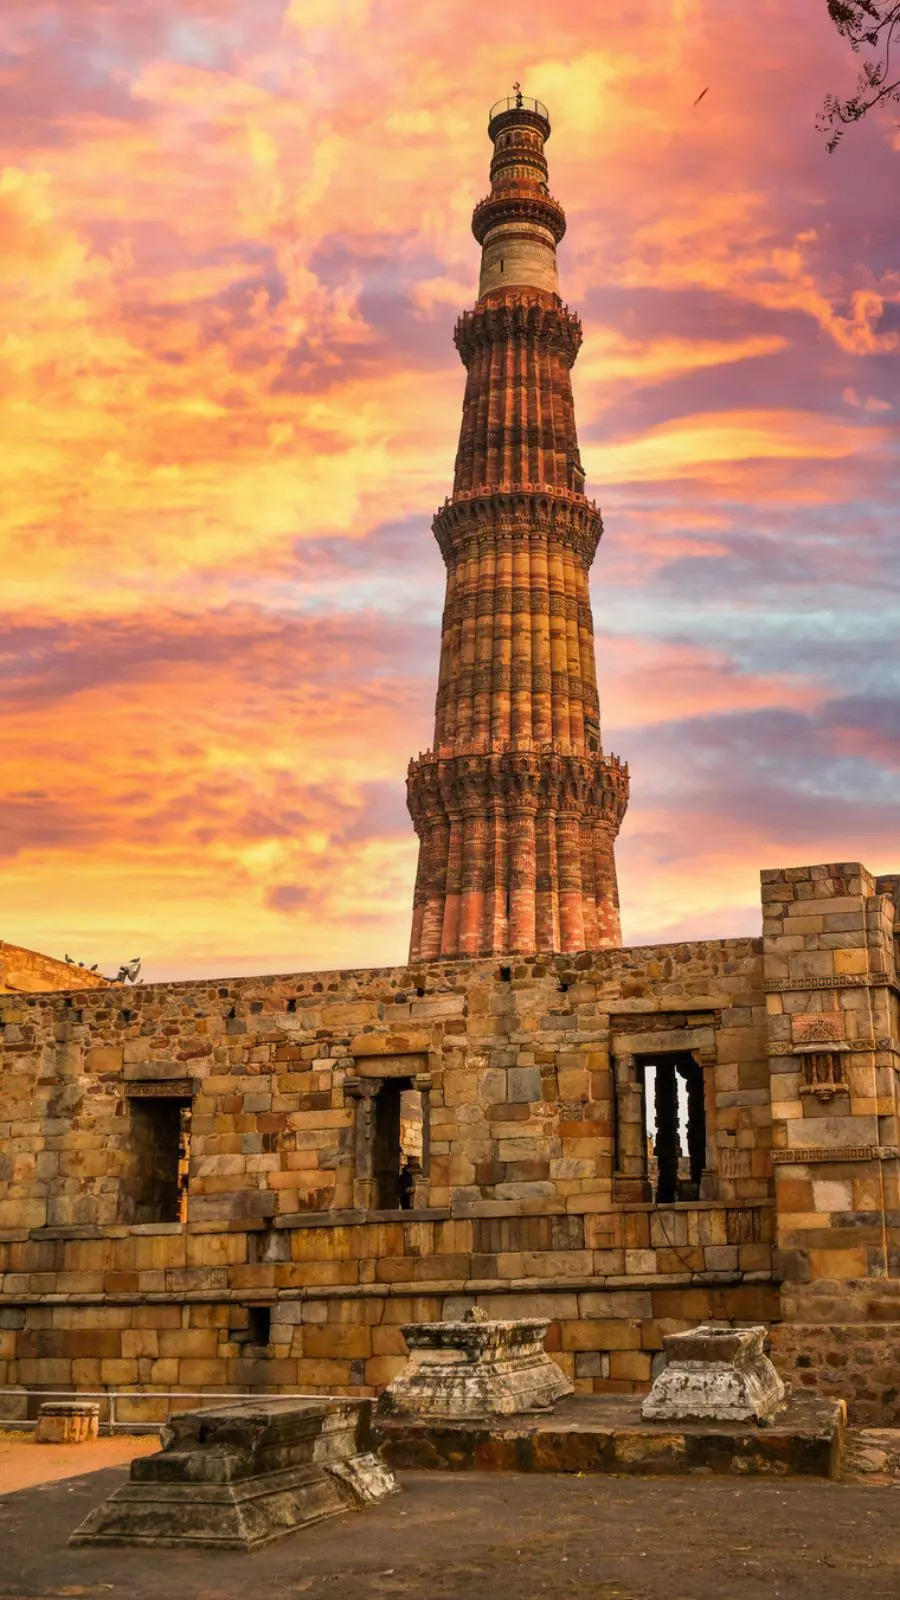 6 things to do in Qutub Minar, the second-most popular tourist spot in India 